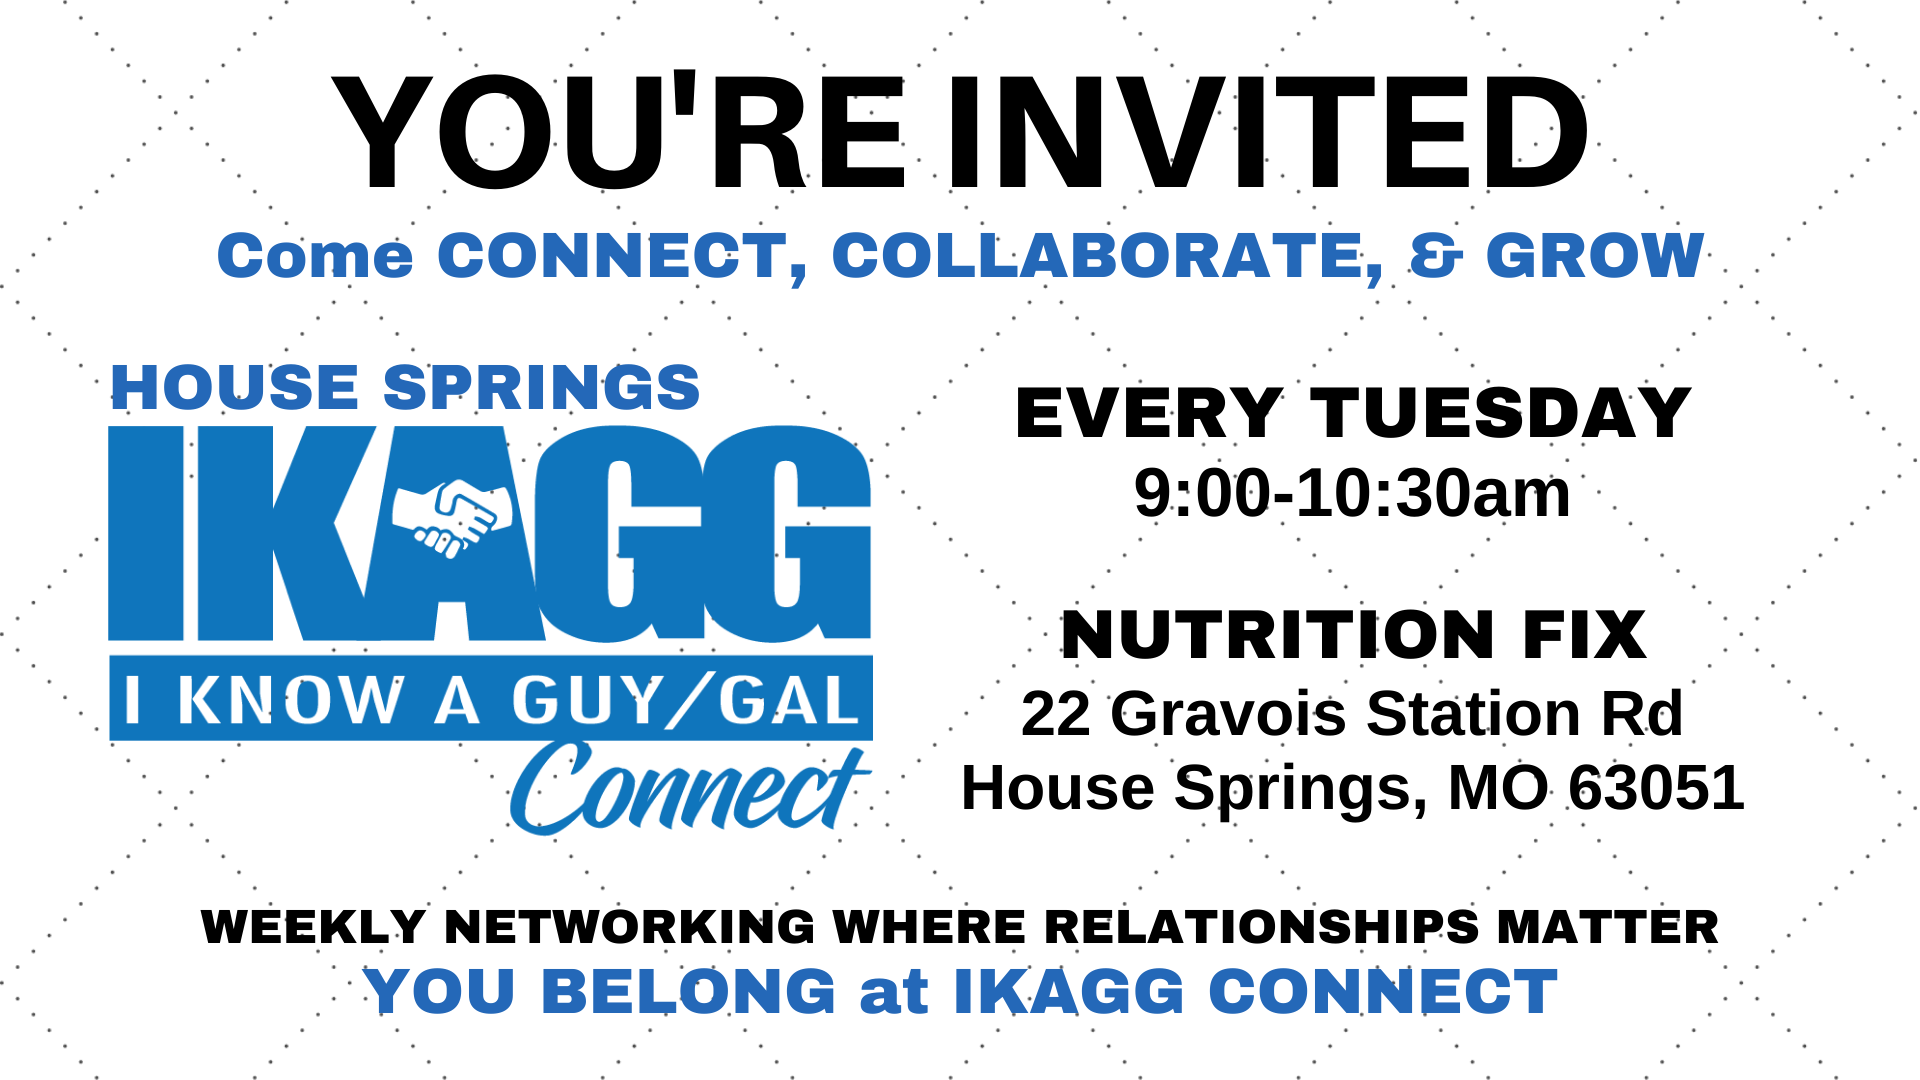 House Springs IKAGG CONNECT Weekly Meeting